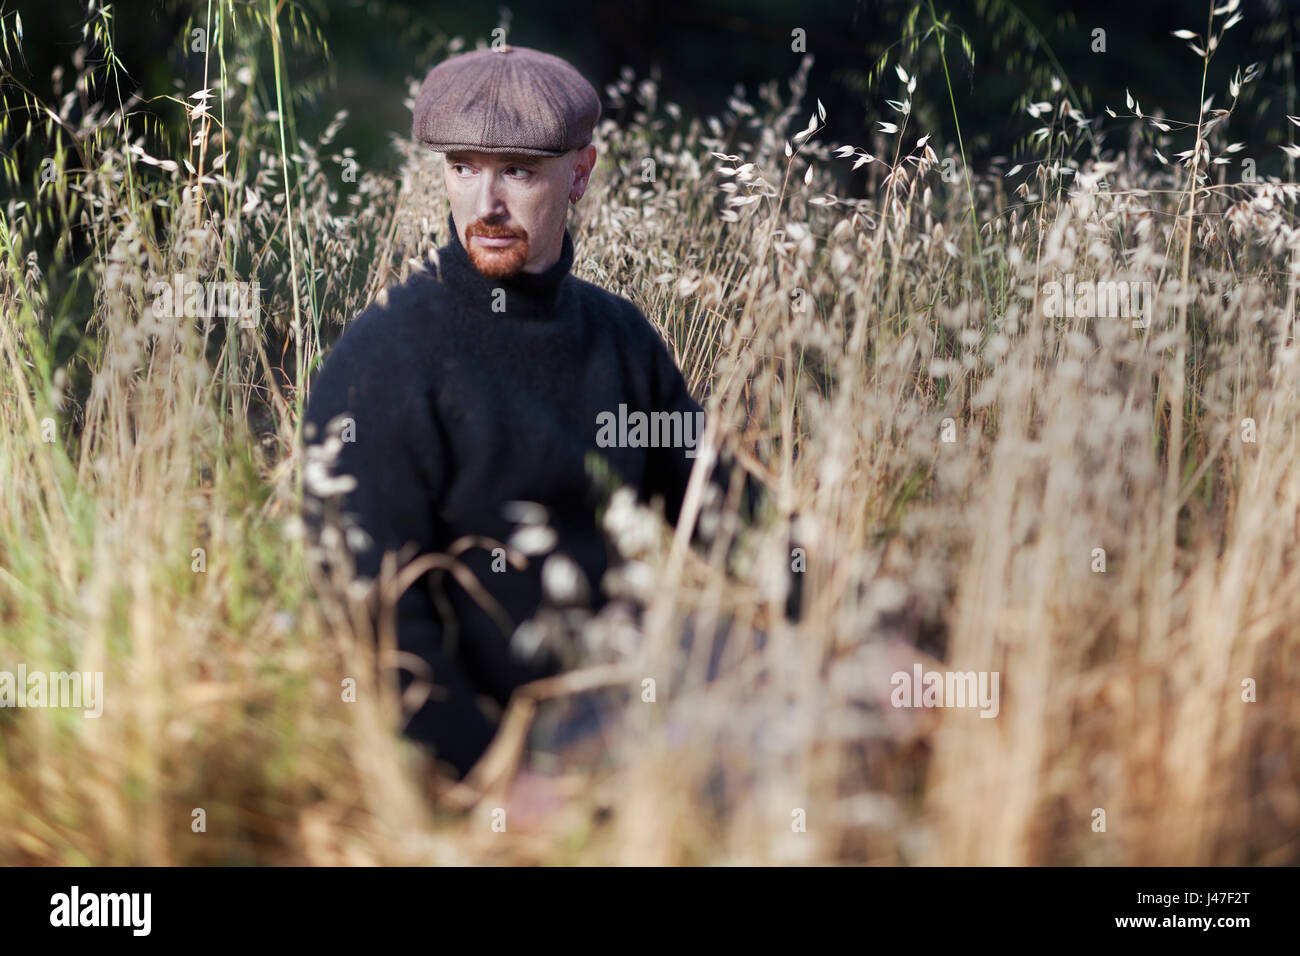 Man with red goatee wearing black turtleneck fisherman's sweater and brown newsboy cap sitting in a golden field of wheat at sunset Stock Photo